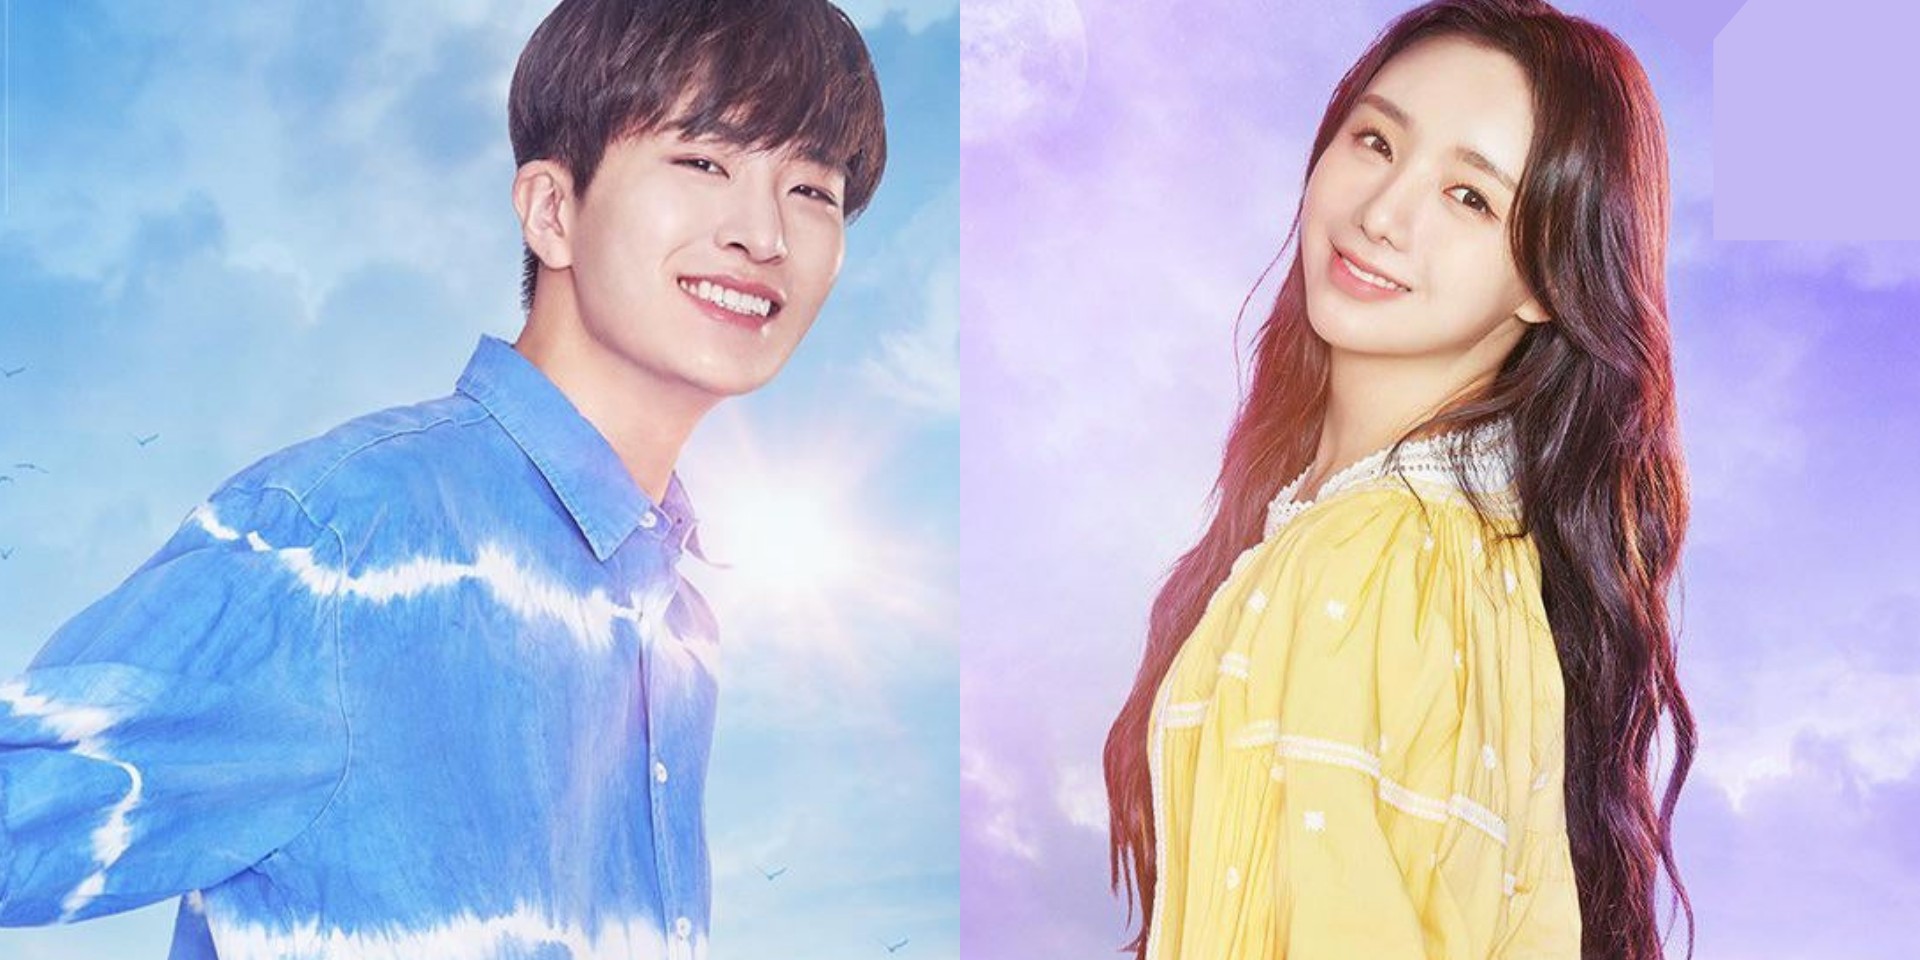 GOT7's Youngjae and Lovelyz's Kei release 'Goodbye Days' from romance musical Midnight Sun